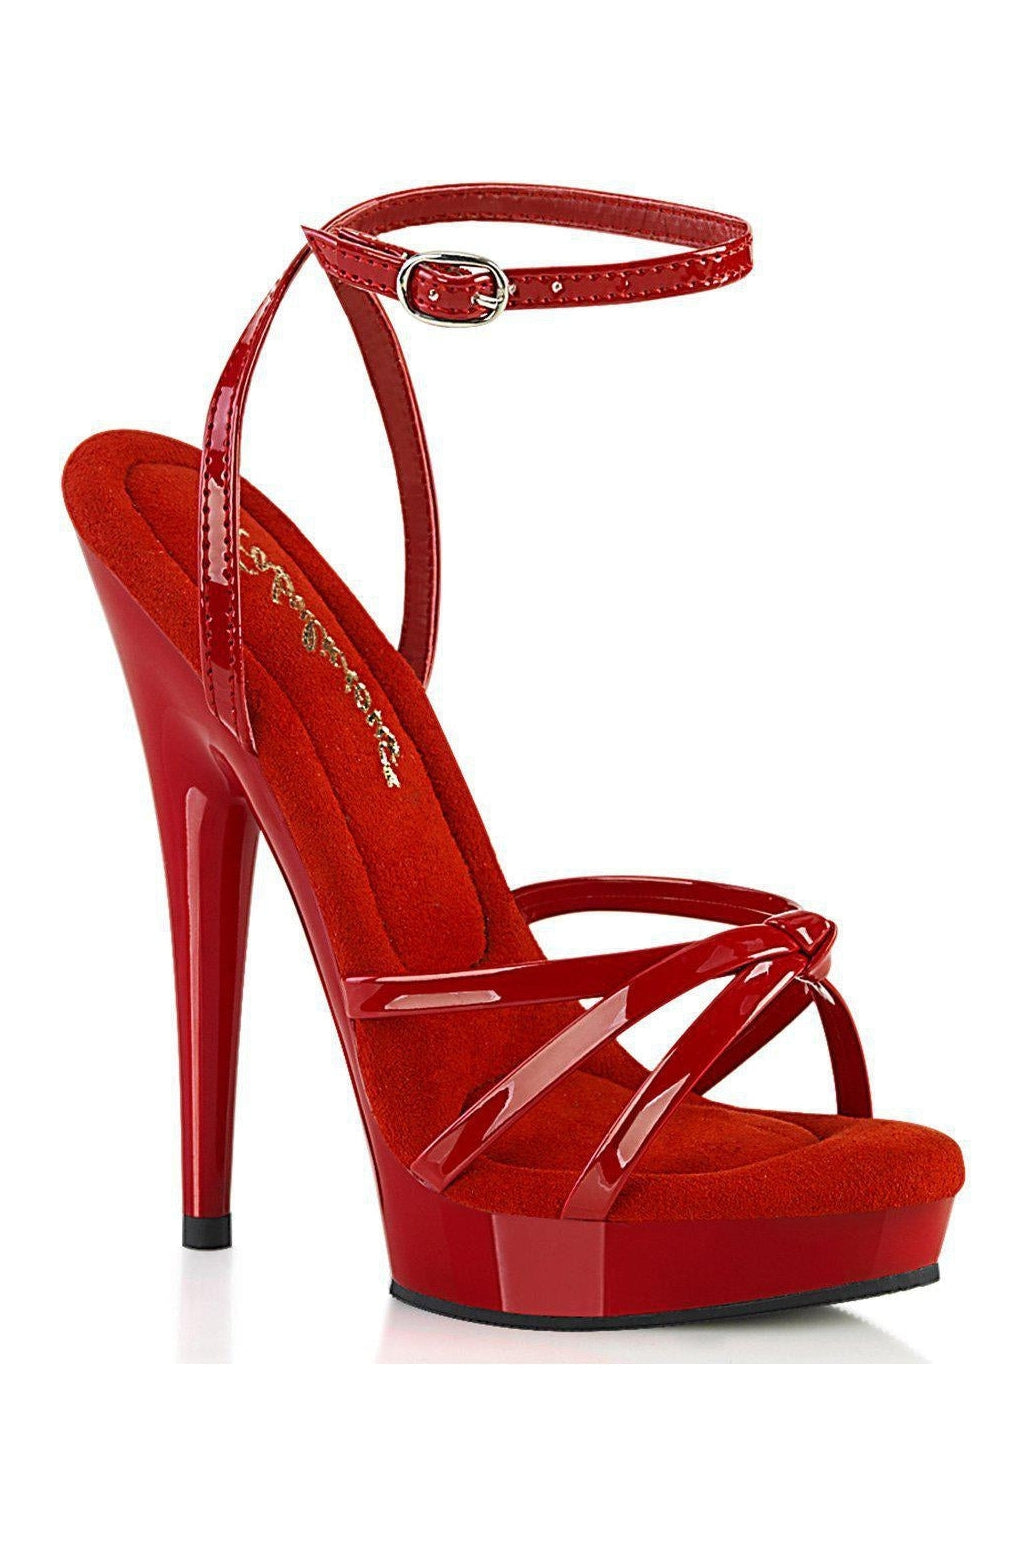 SULTRY-638 Sandal | Red Patent-Sandals-Fabulicious-Red-9-Patent-SEXYSHOES.COM